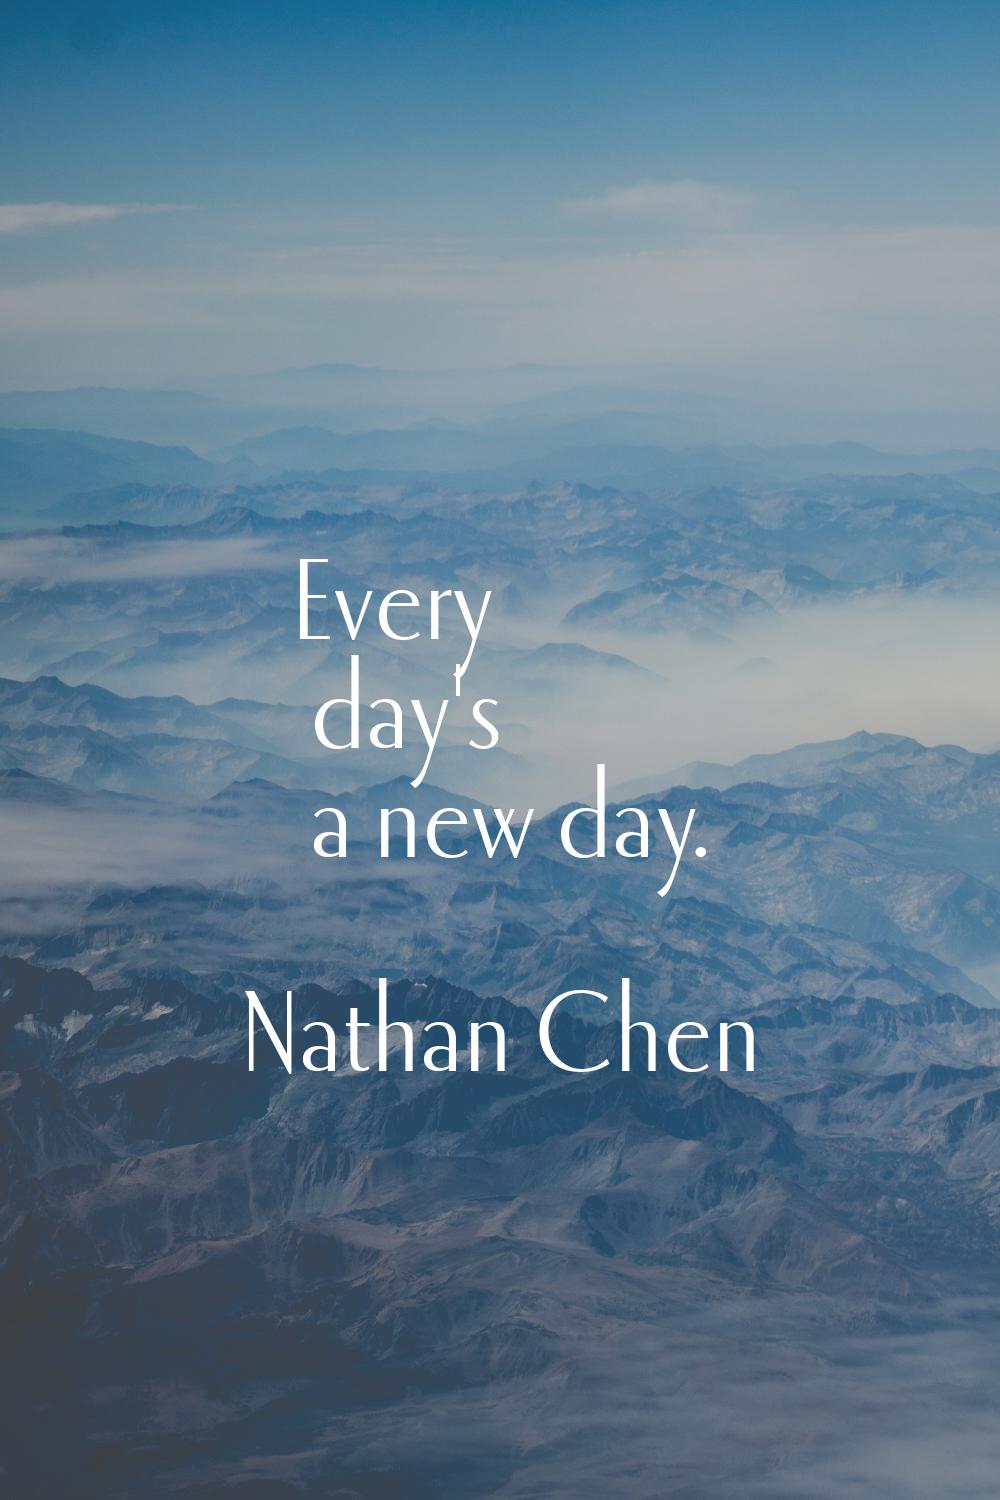 Every day's a new day.